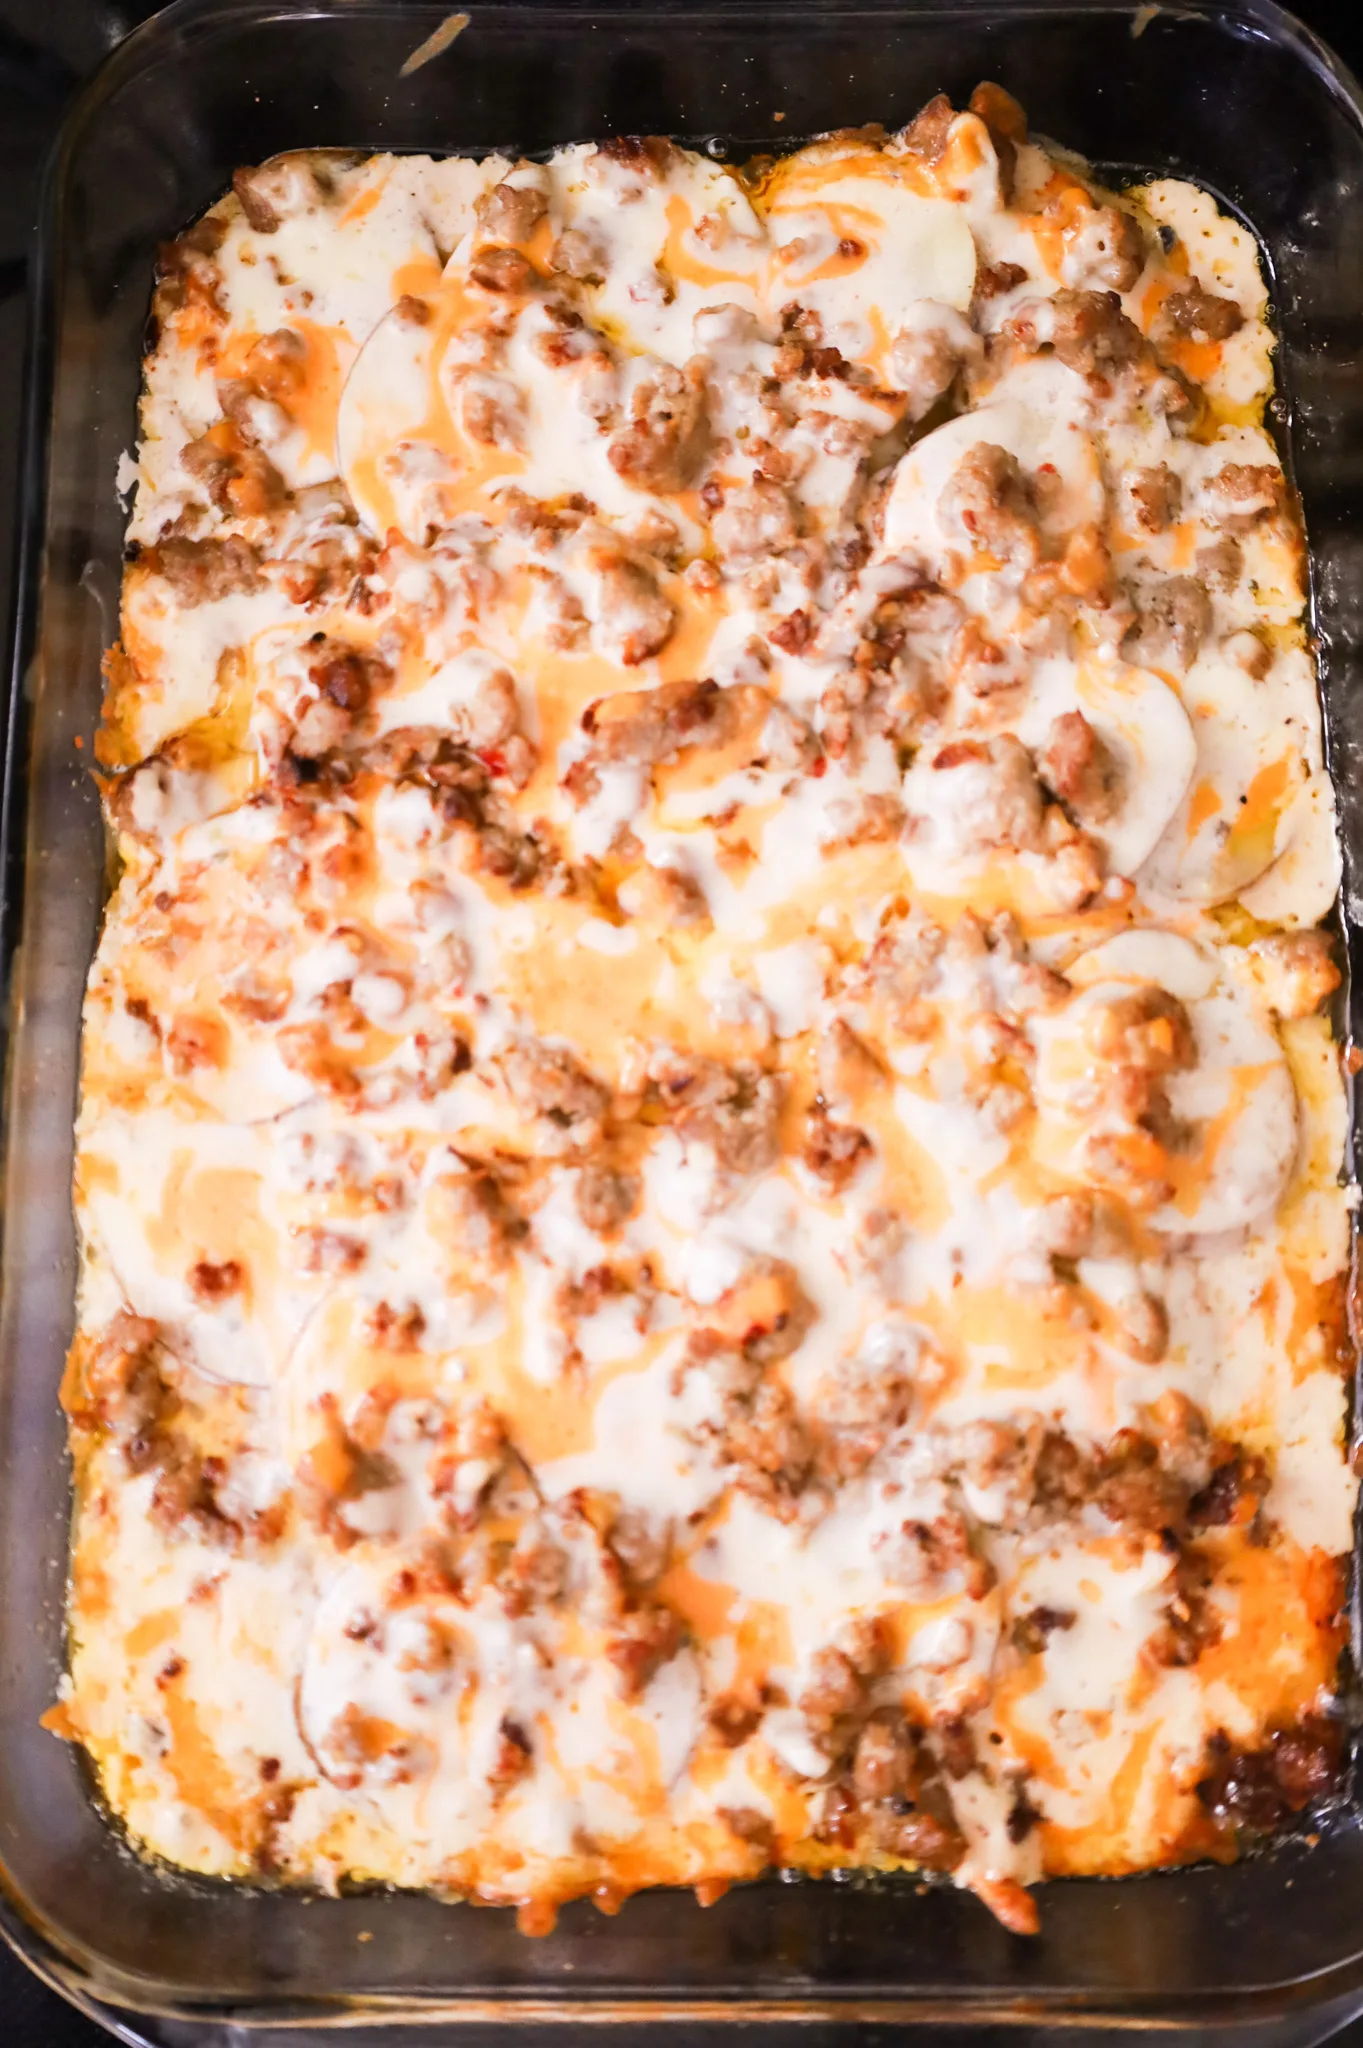 sausage and potato casserole after baking covered